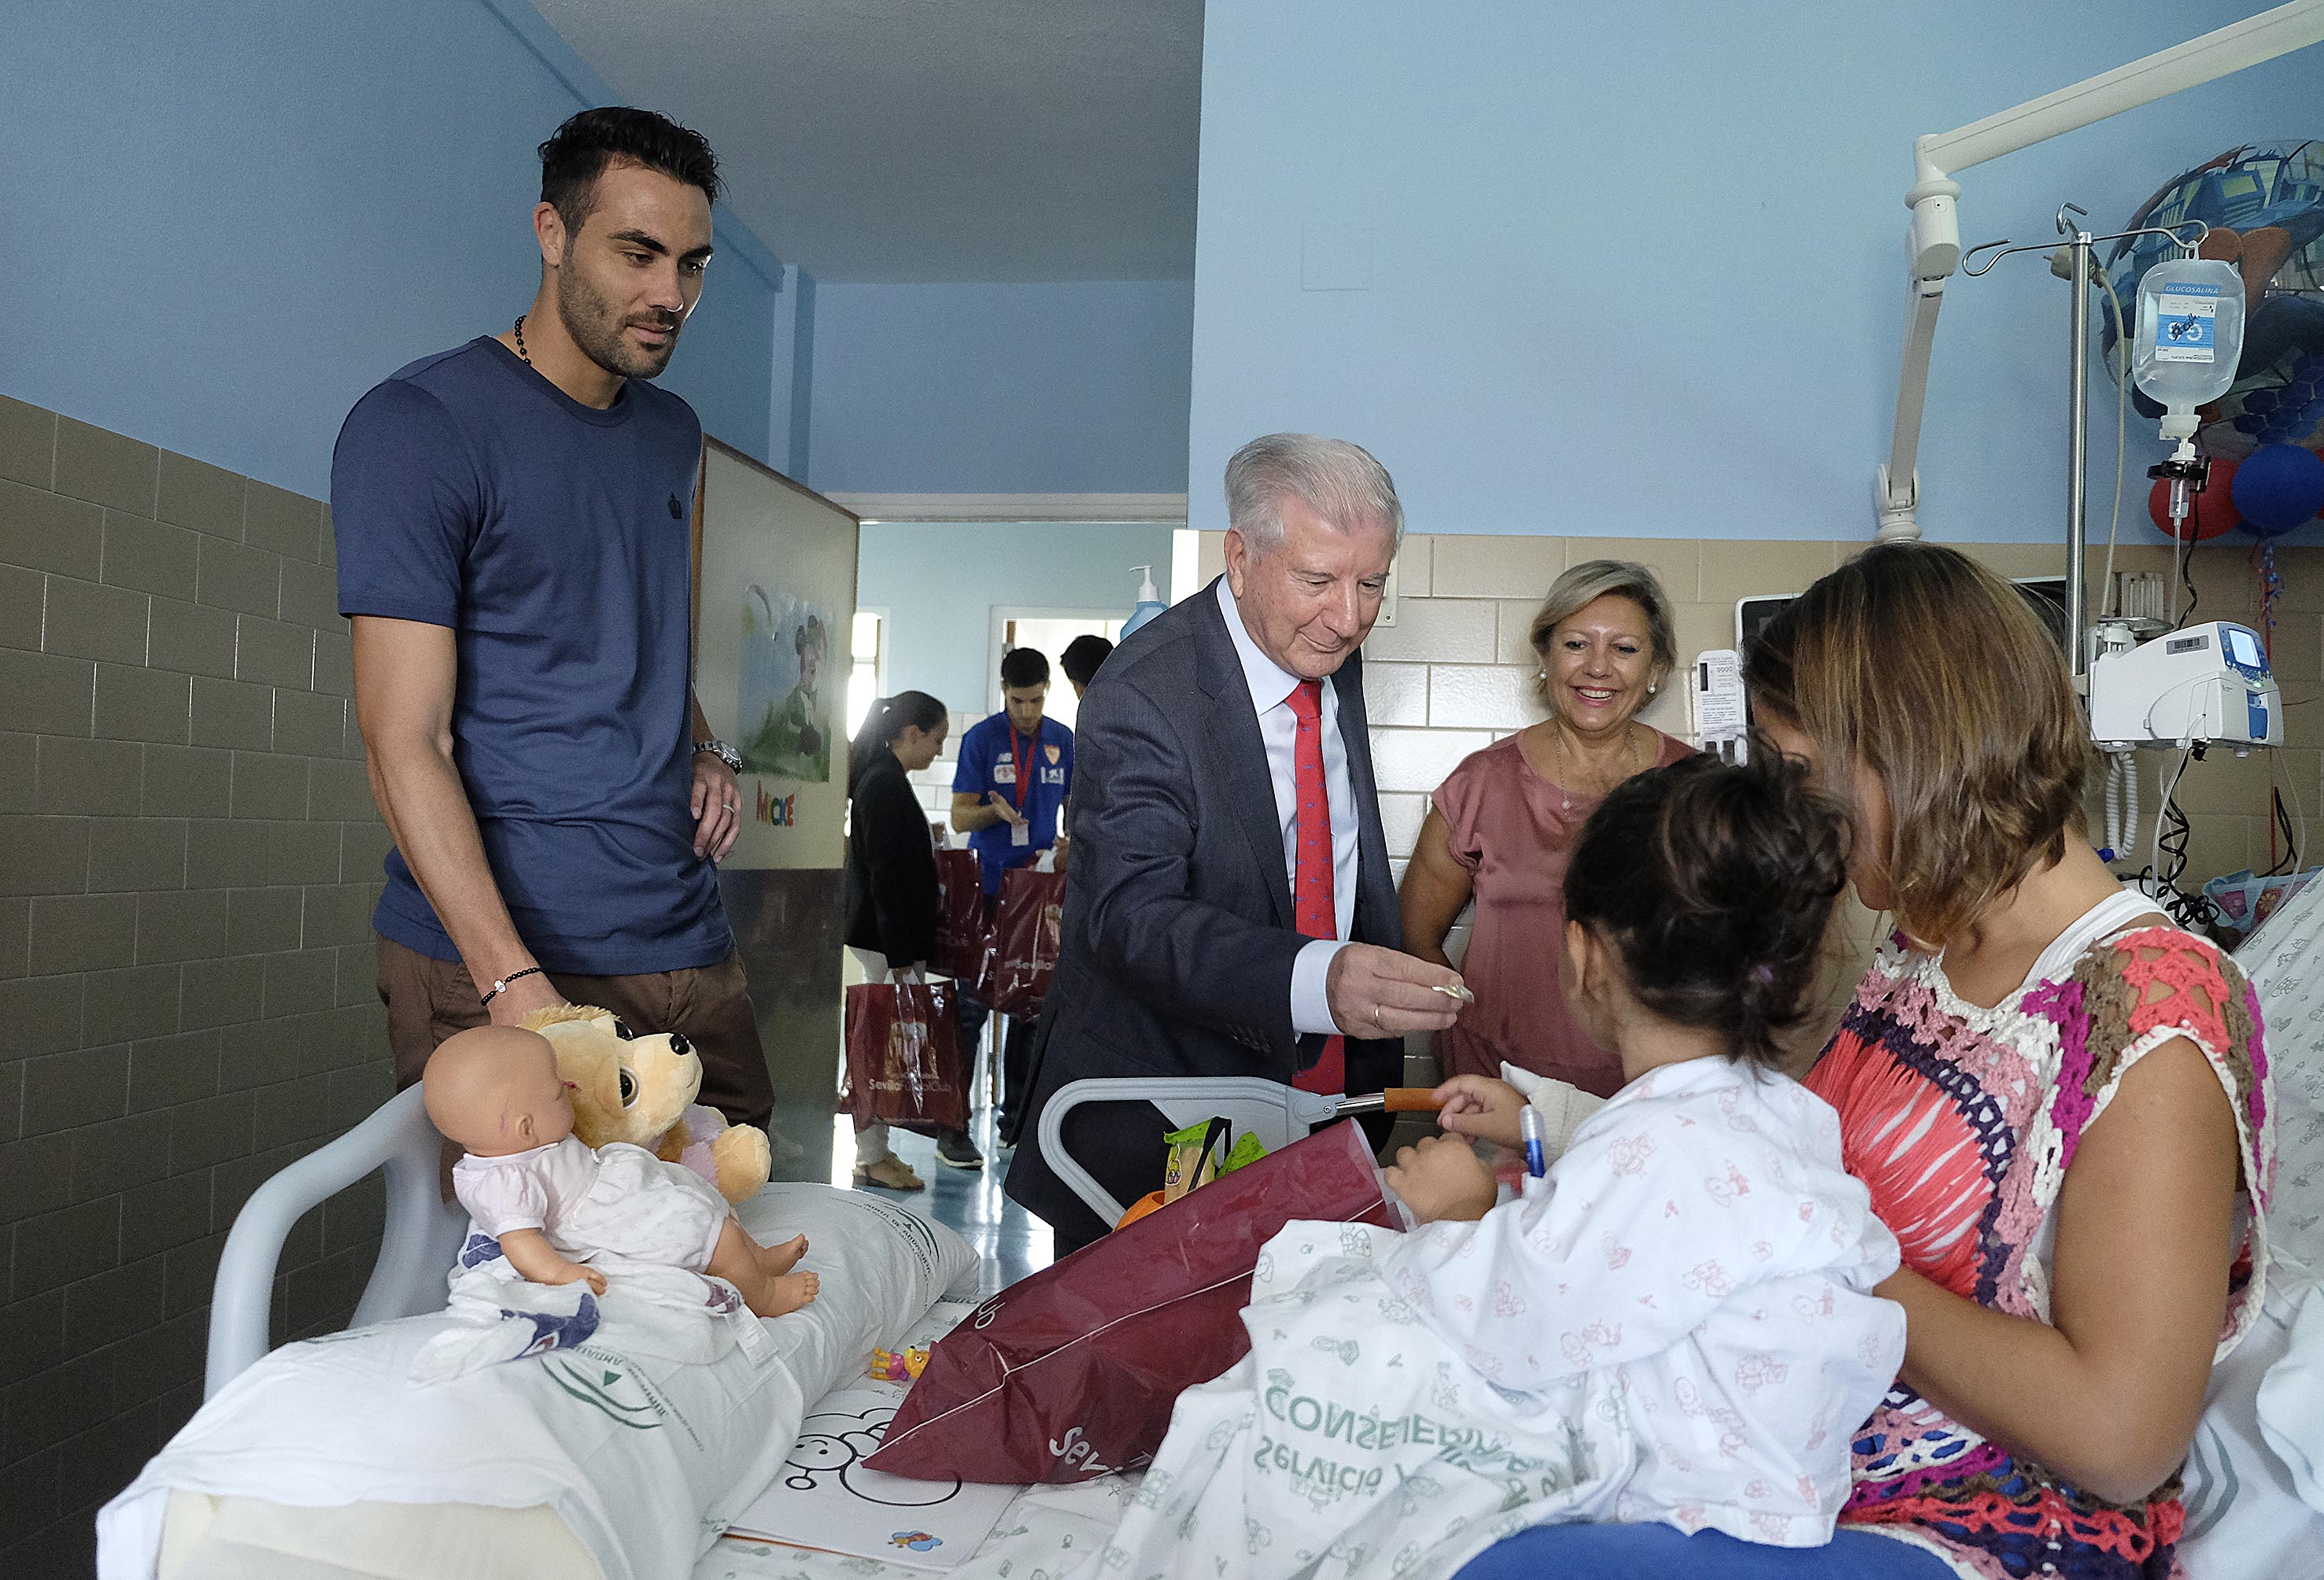 Vice-President Gabriel Ramos and the Sevilla FC captain Iborra give a gift to a girl